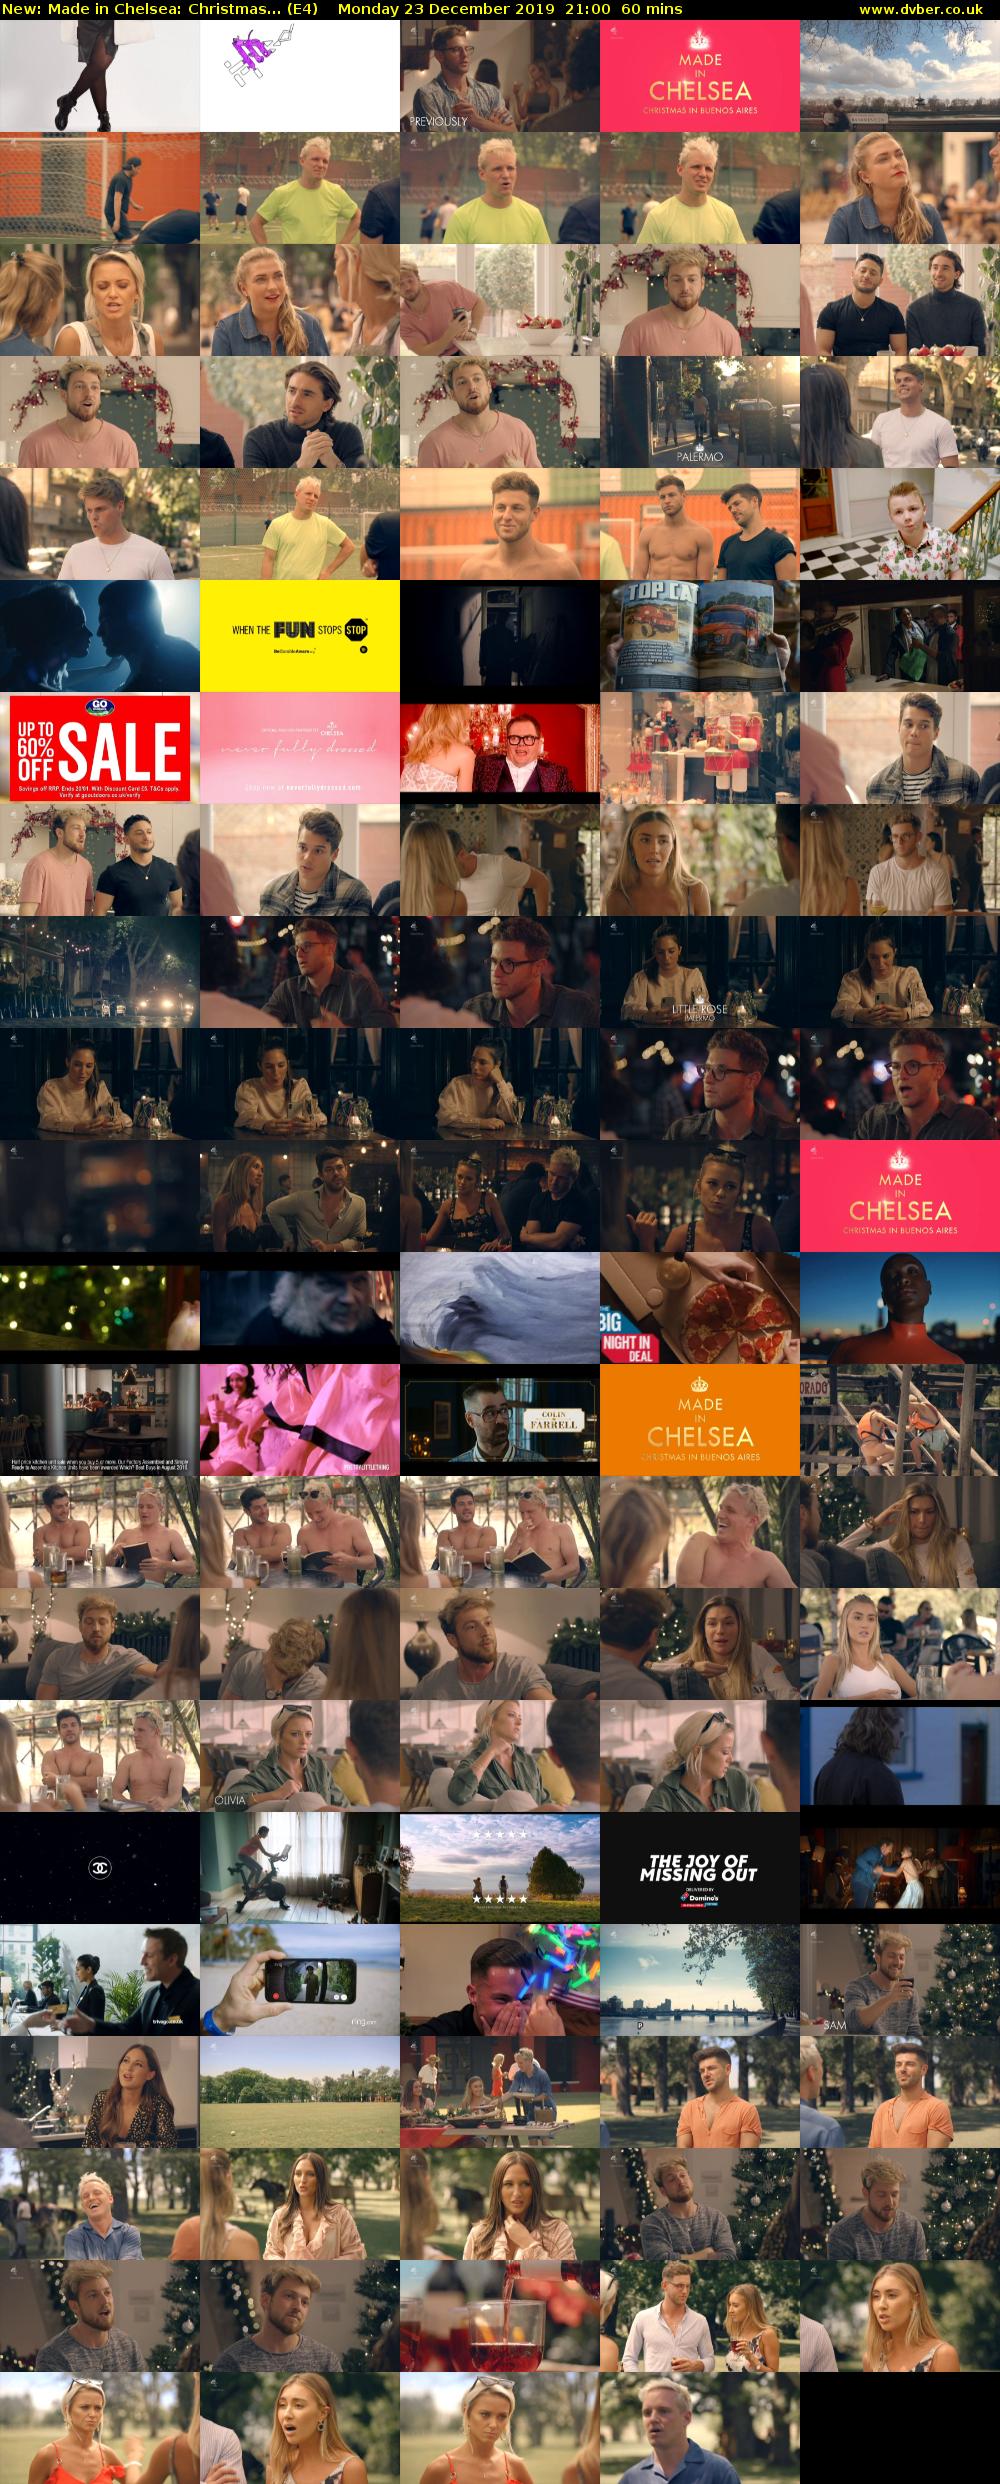 Made in Chelsea: Christmas... (E4) Monday 23 December 2019 21:00 - 22:00